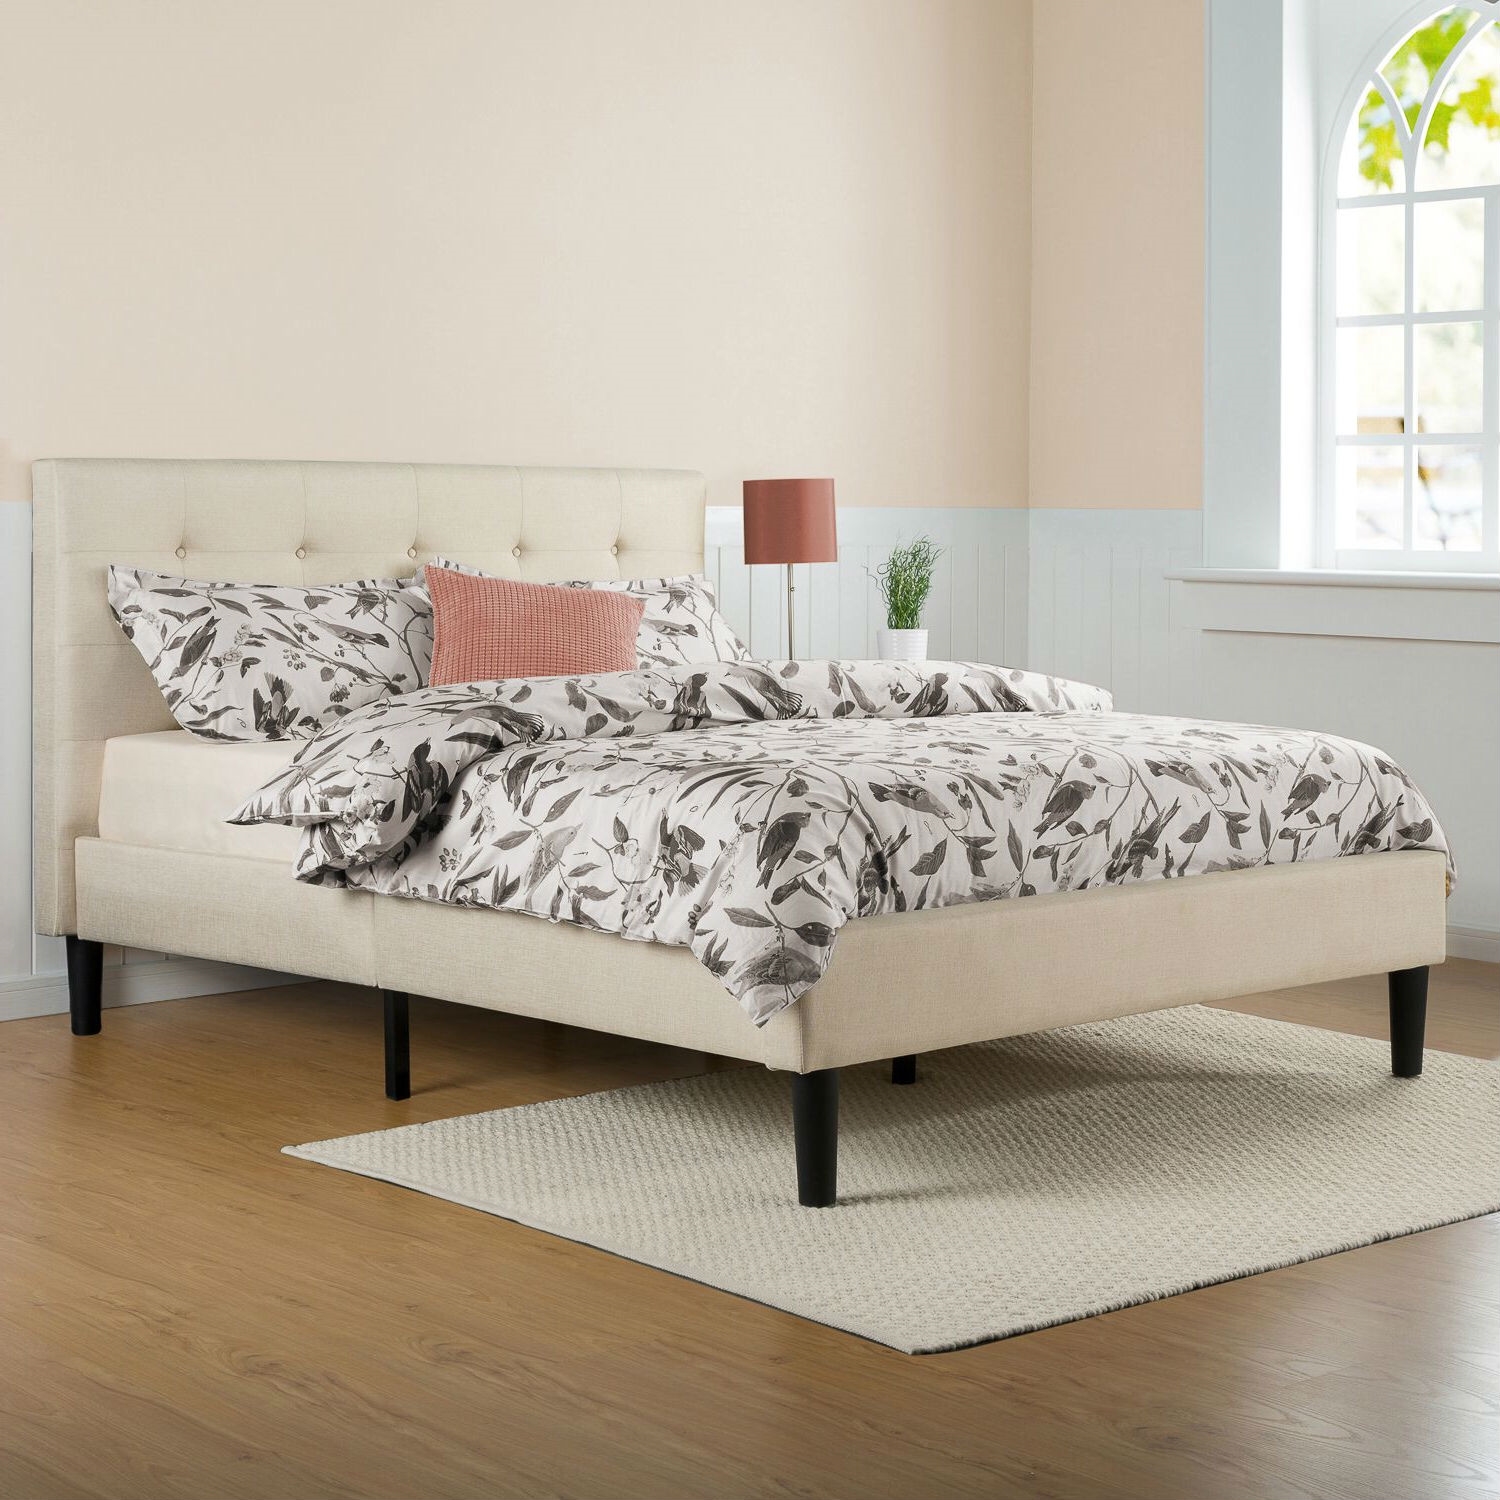 full size platform bed frame with headboard full size taupe beige upholstered platform bed frame with headboard LYVTEYE